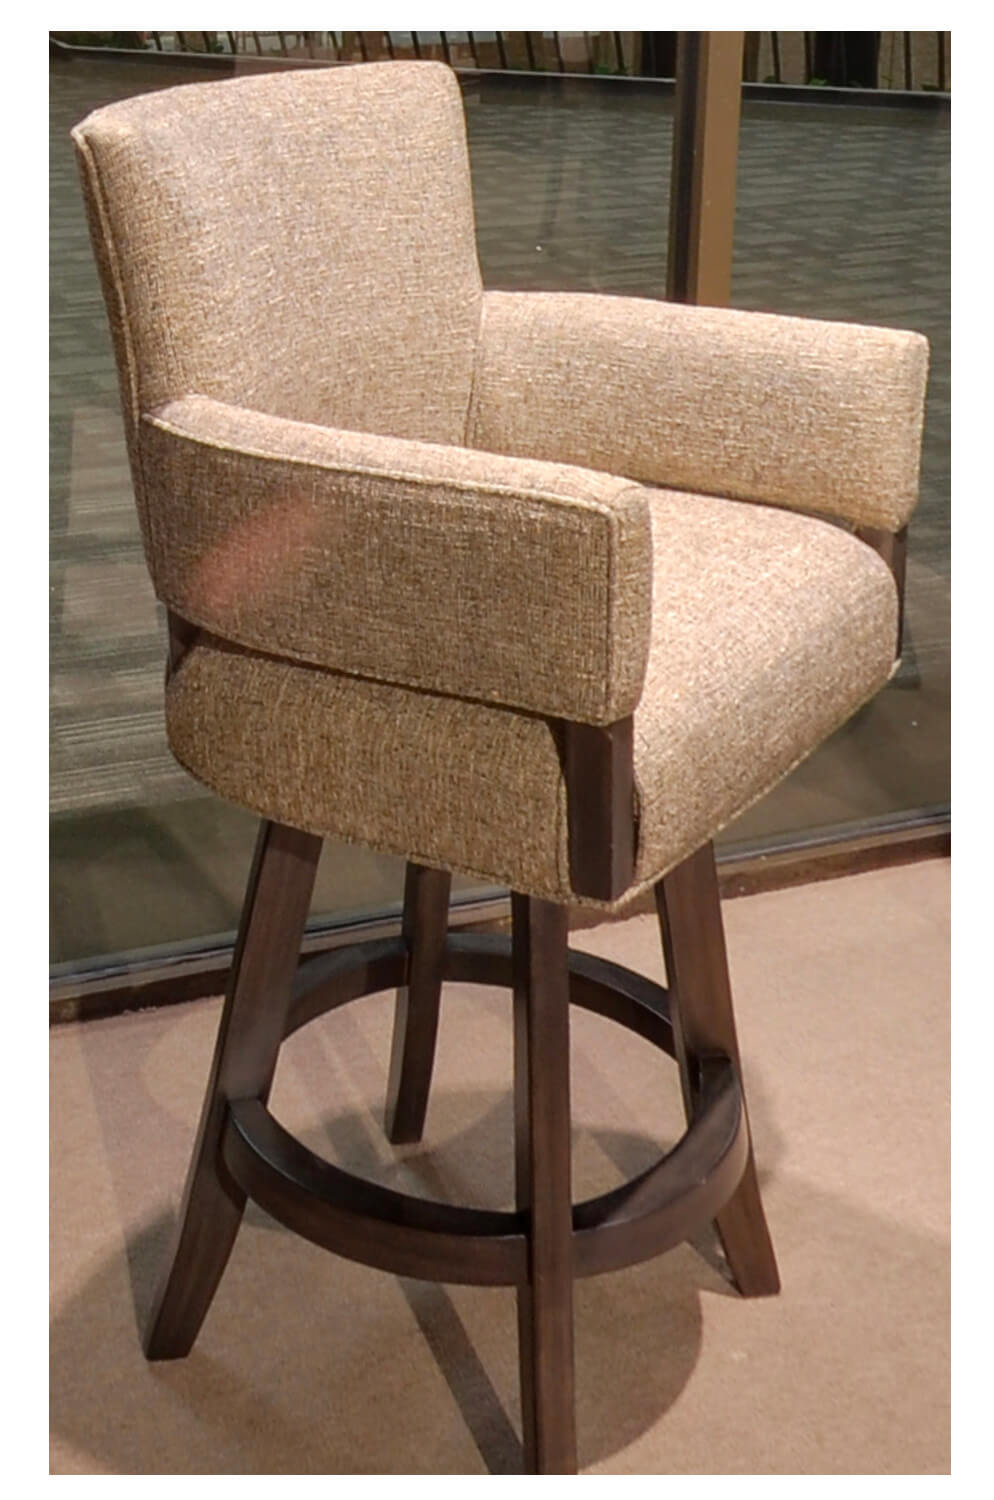 Mod Upholstered Wood Swivel Stool, Tufted Bar Stools With Arms